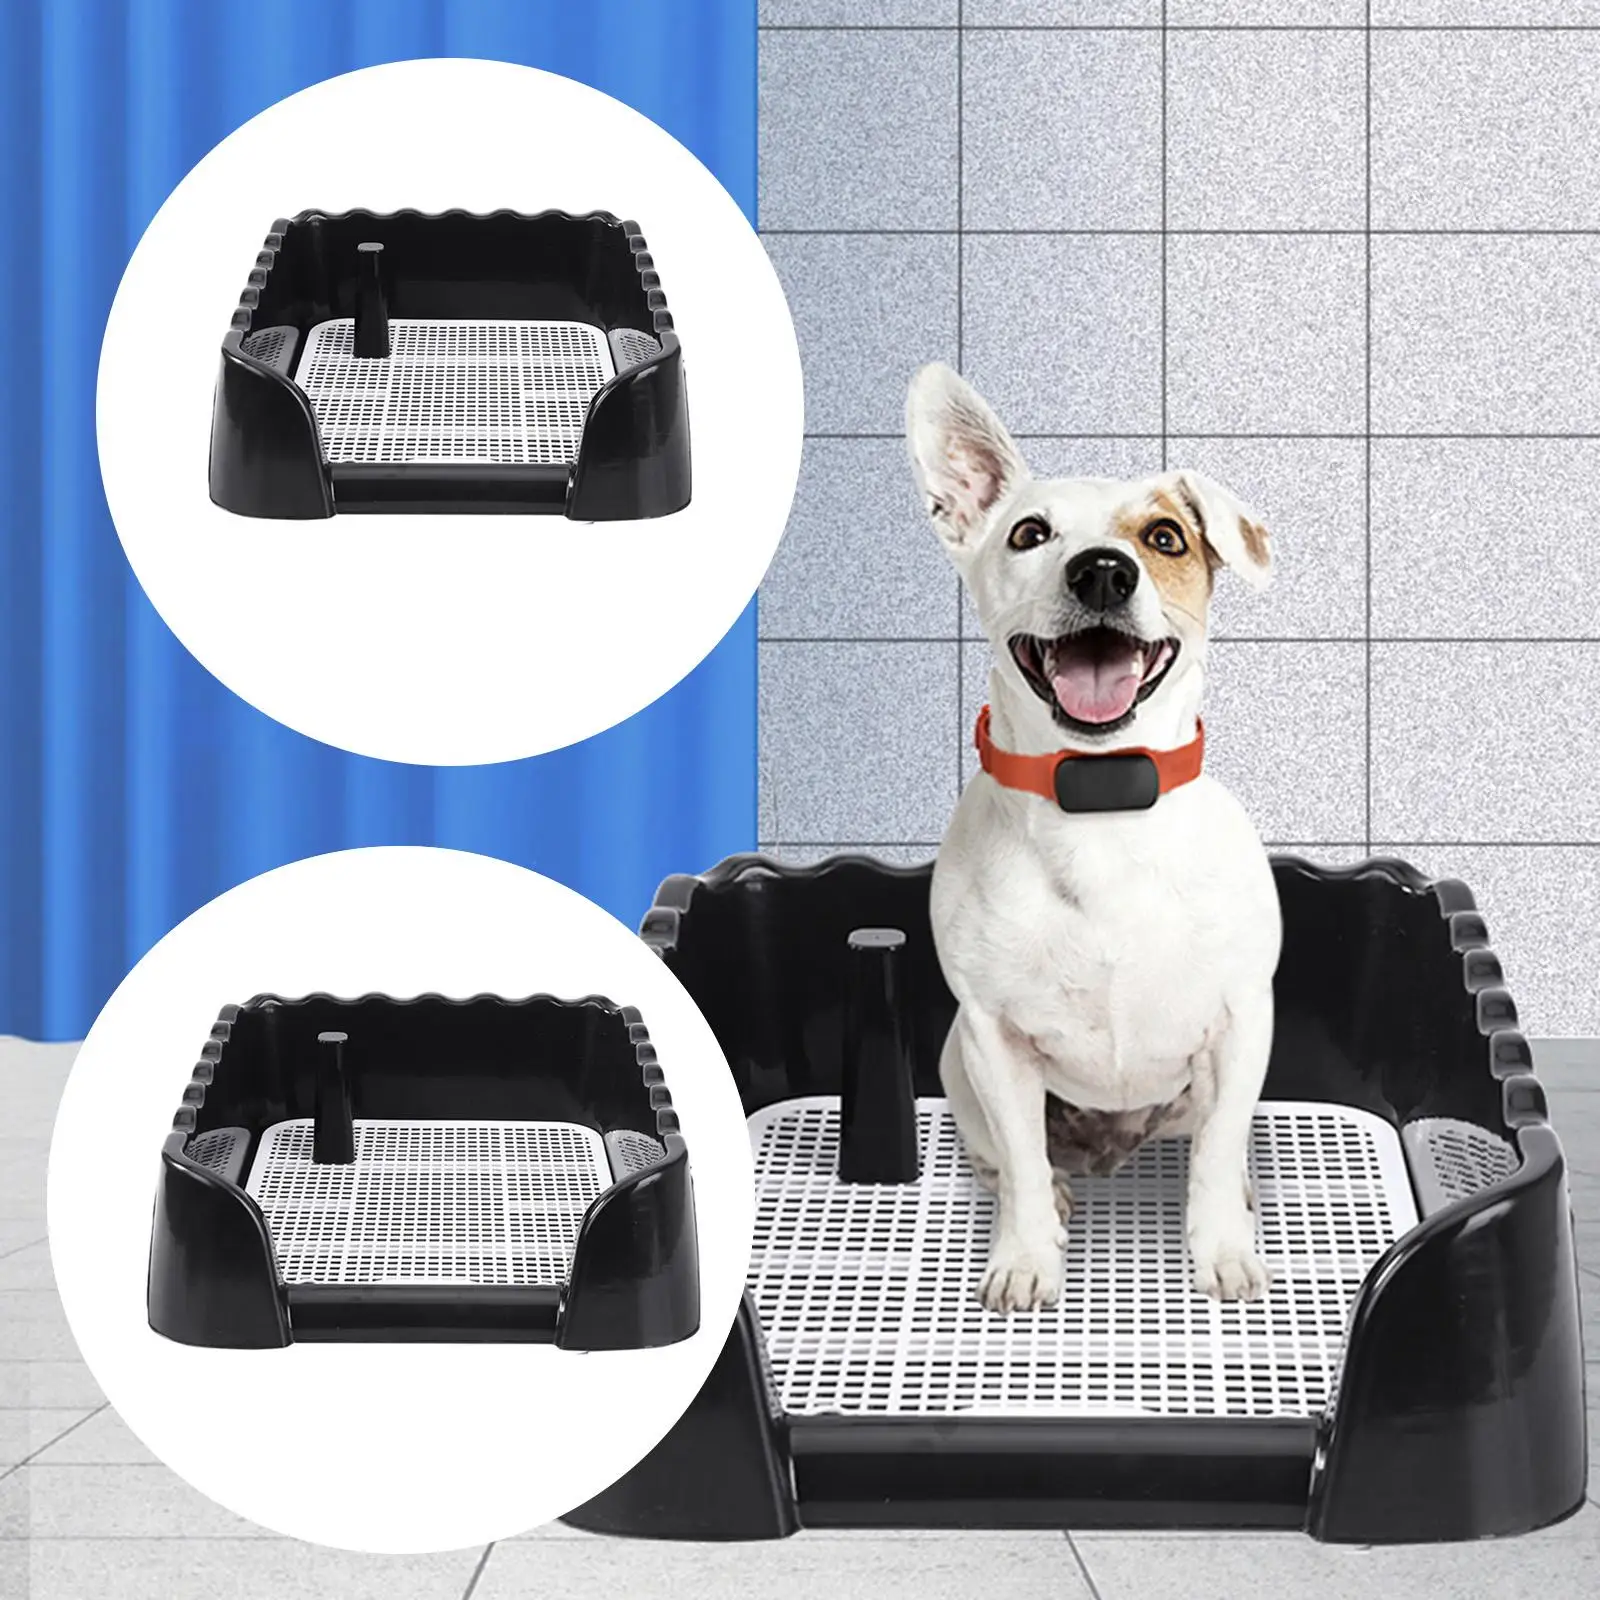 Pet Dog Toilet, Puppy Training Tray with Removable Post, Portable Cleaning Tool Urinal Lavatory Basin for Small Medium Dogs